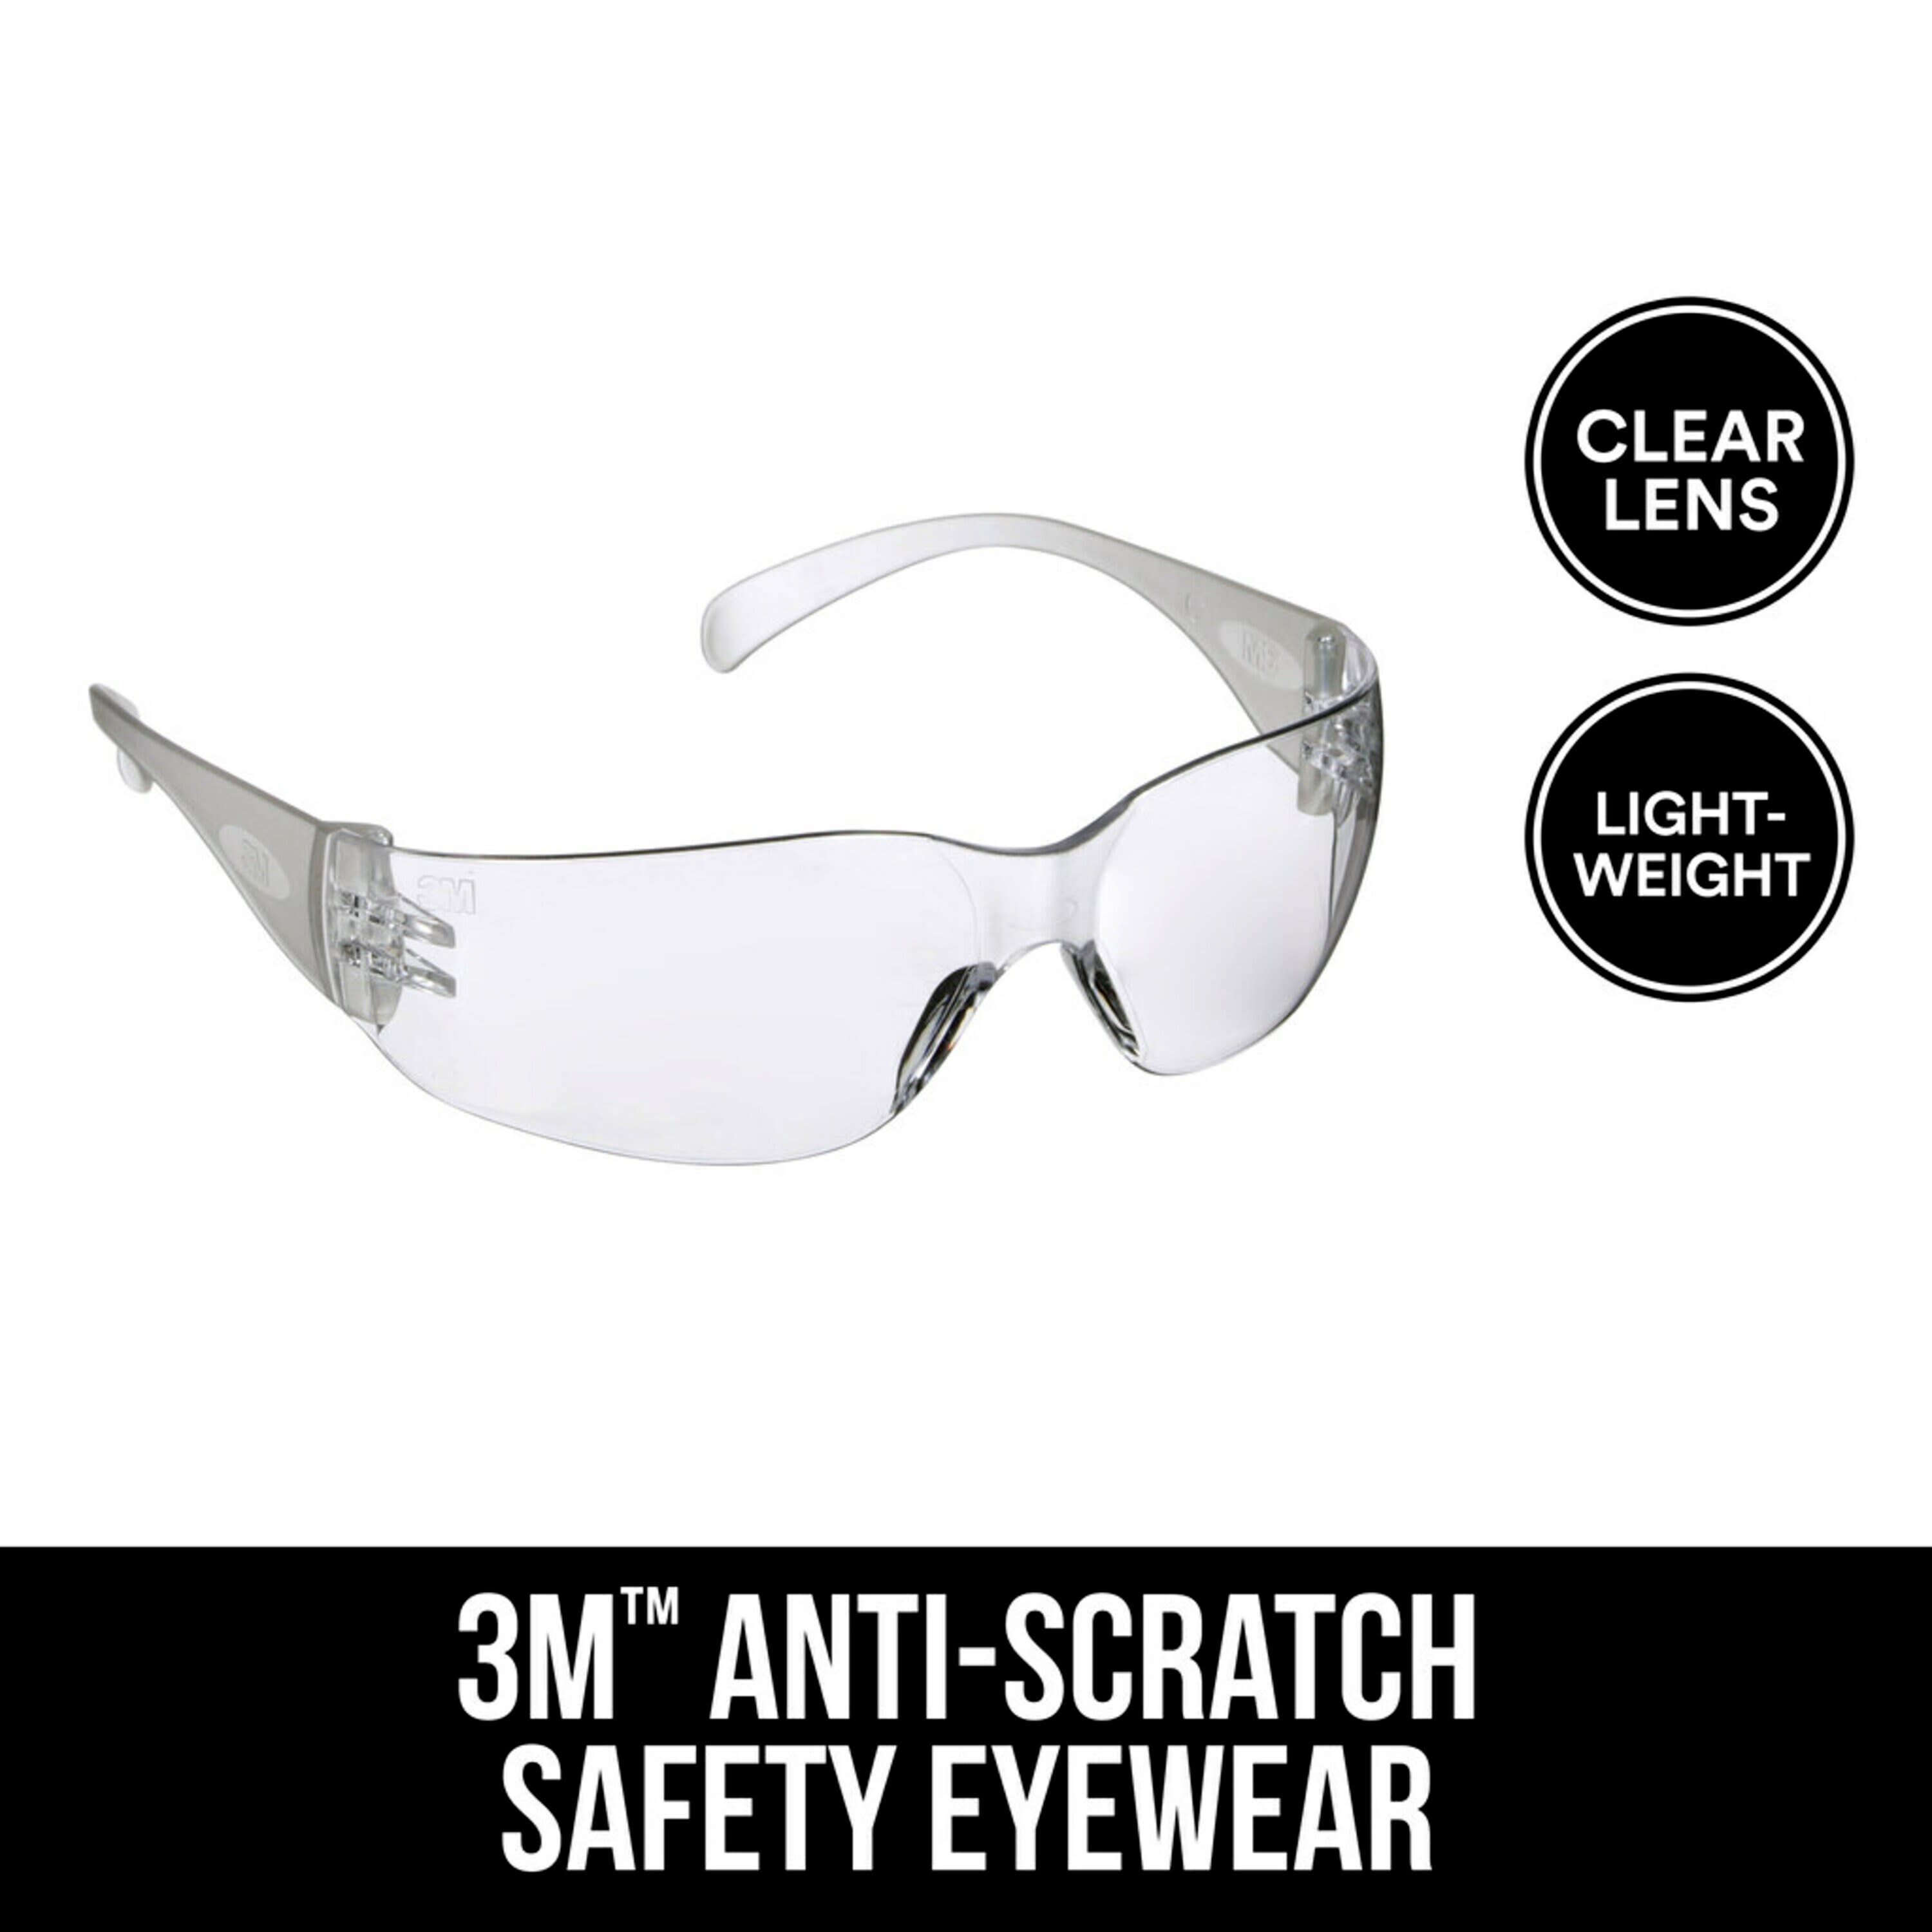 Eye Protection at Lowes.com